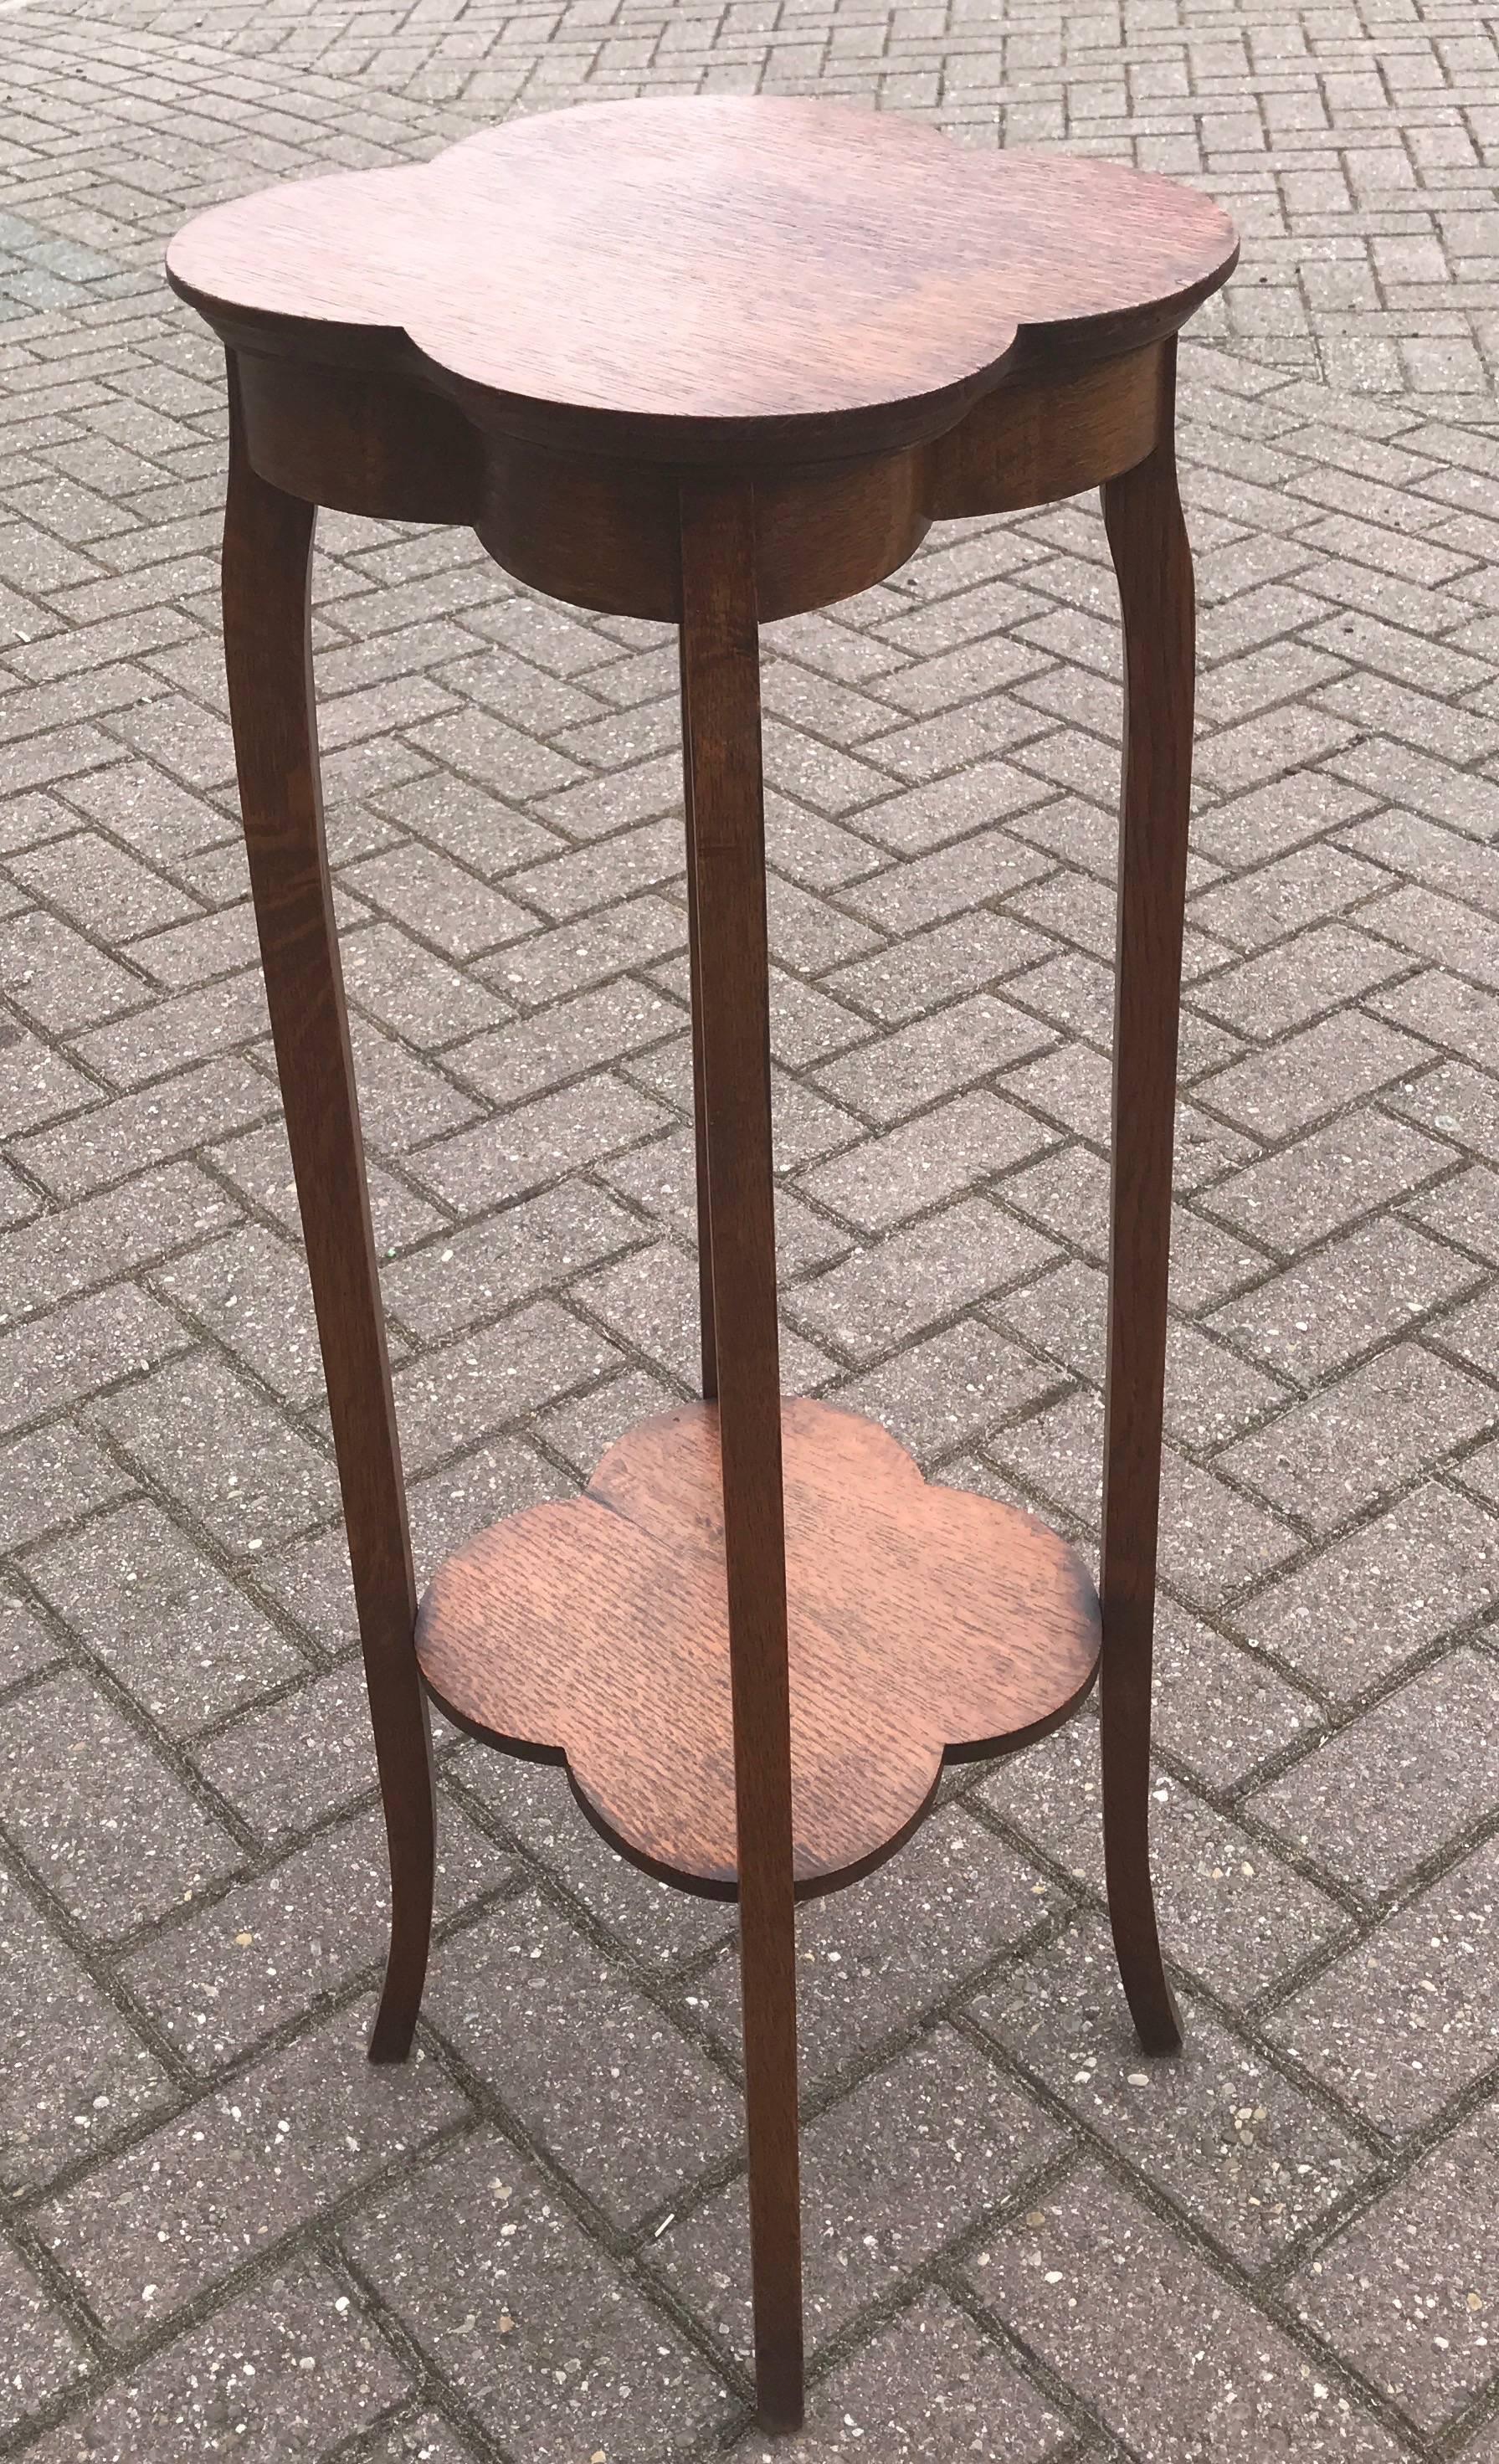 Stylish Arts and Crafts table with a stylized clover leaf top.

This elegantly shaped and all handcrafted plant stand from the early 1900s has a wonderful patina. This fine quality, oak table is as stable as the day it was made and it can be used